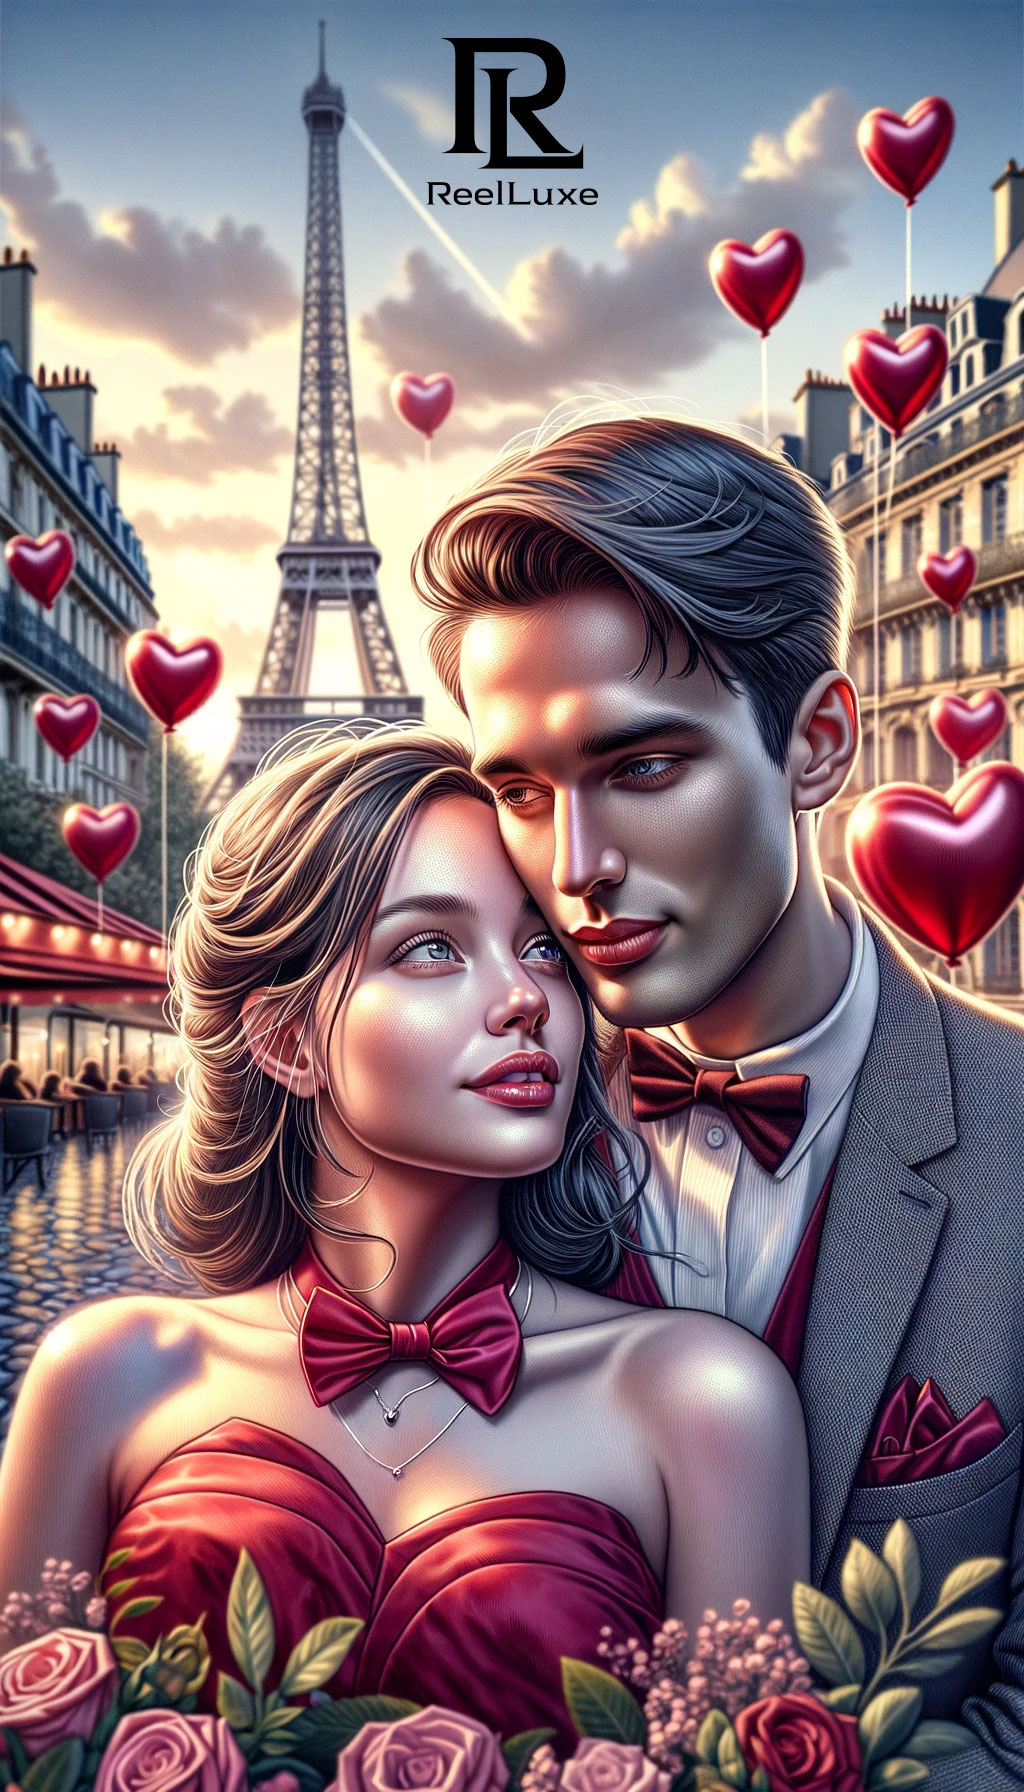 Romance in the Air - Valentine's Day - Beauty and Fashion - Paris, France - 1